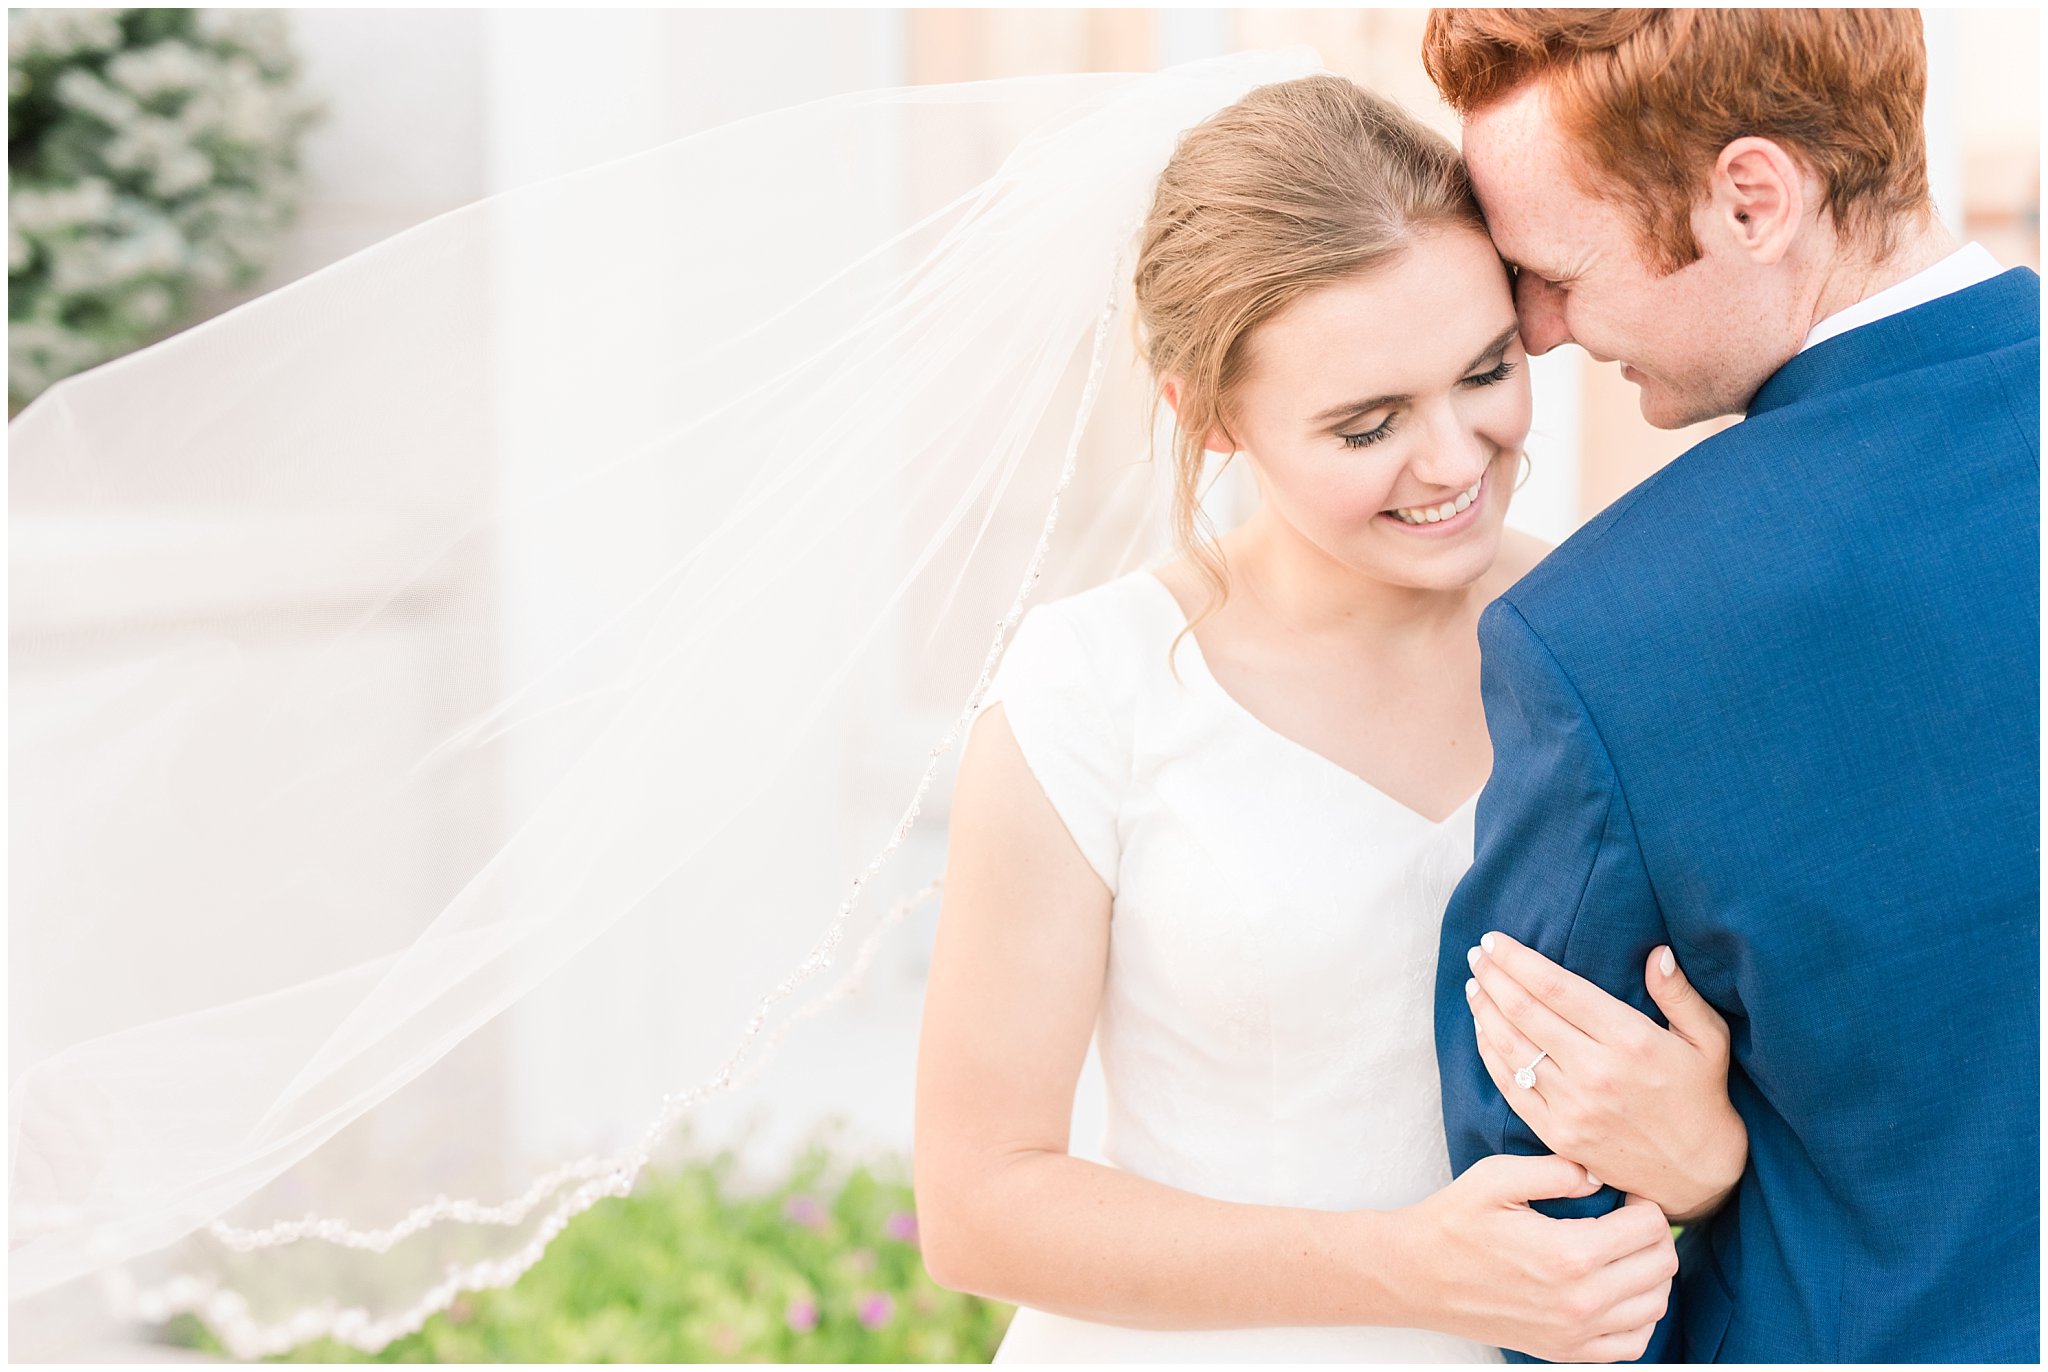 Bride and groom portraits with bride in simple elegant dress and veil, and groom in blue suit with blush tie at the Bountiful Temple | Bountiful Temple Summer Formal Session | Utah Weddings | Jessie and Dallin Photography